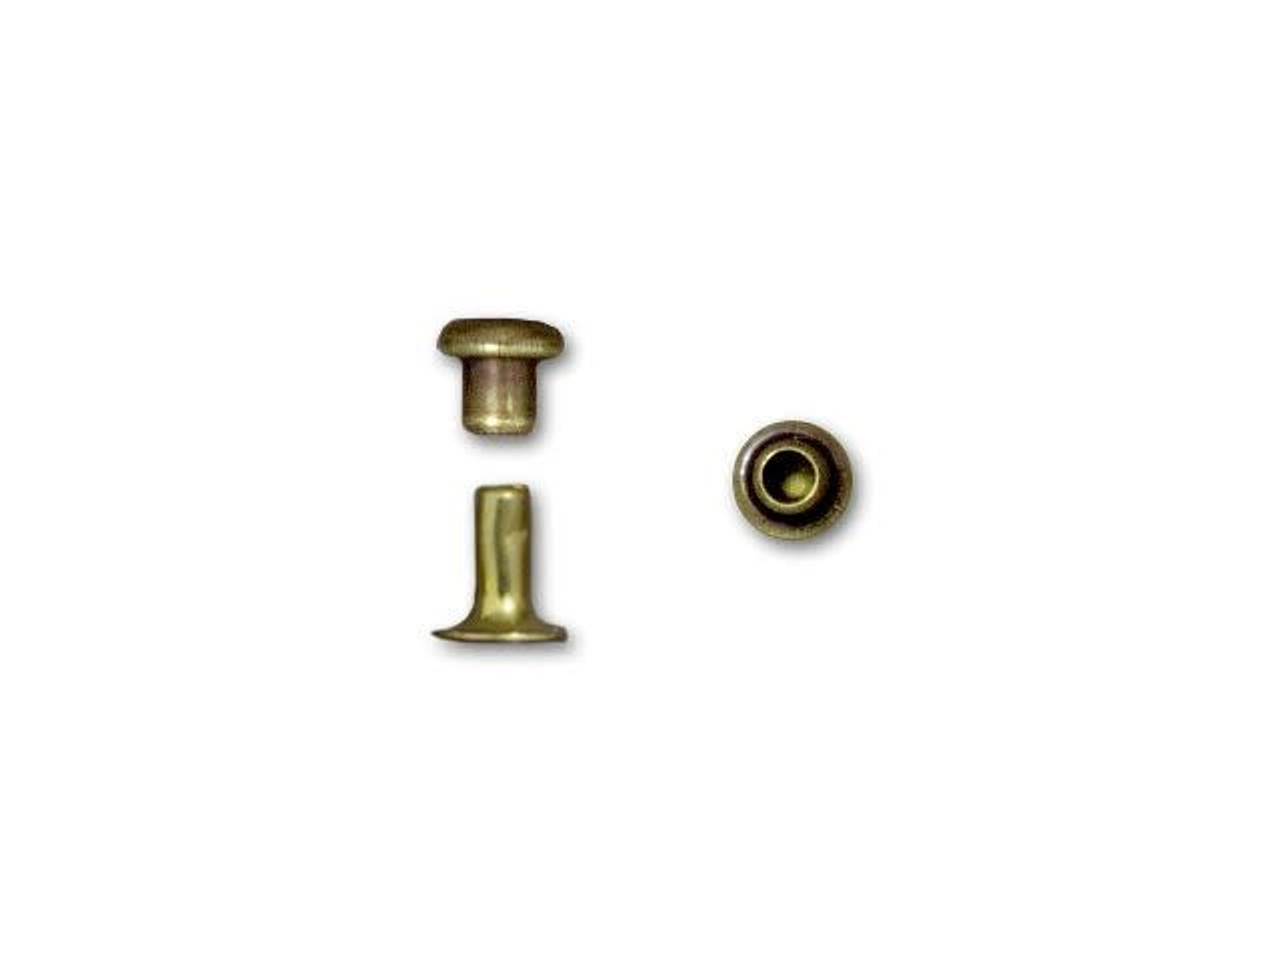 69-981-05-6 TierraCast Antiqued Brass Plated Leather Rivets, 3/32